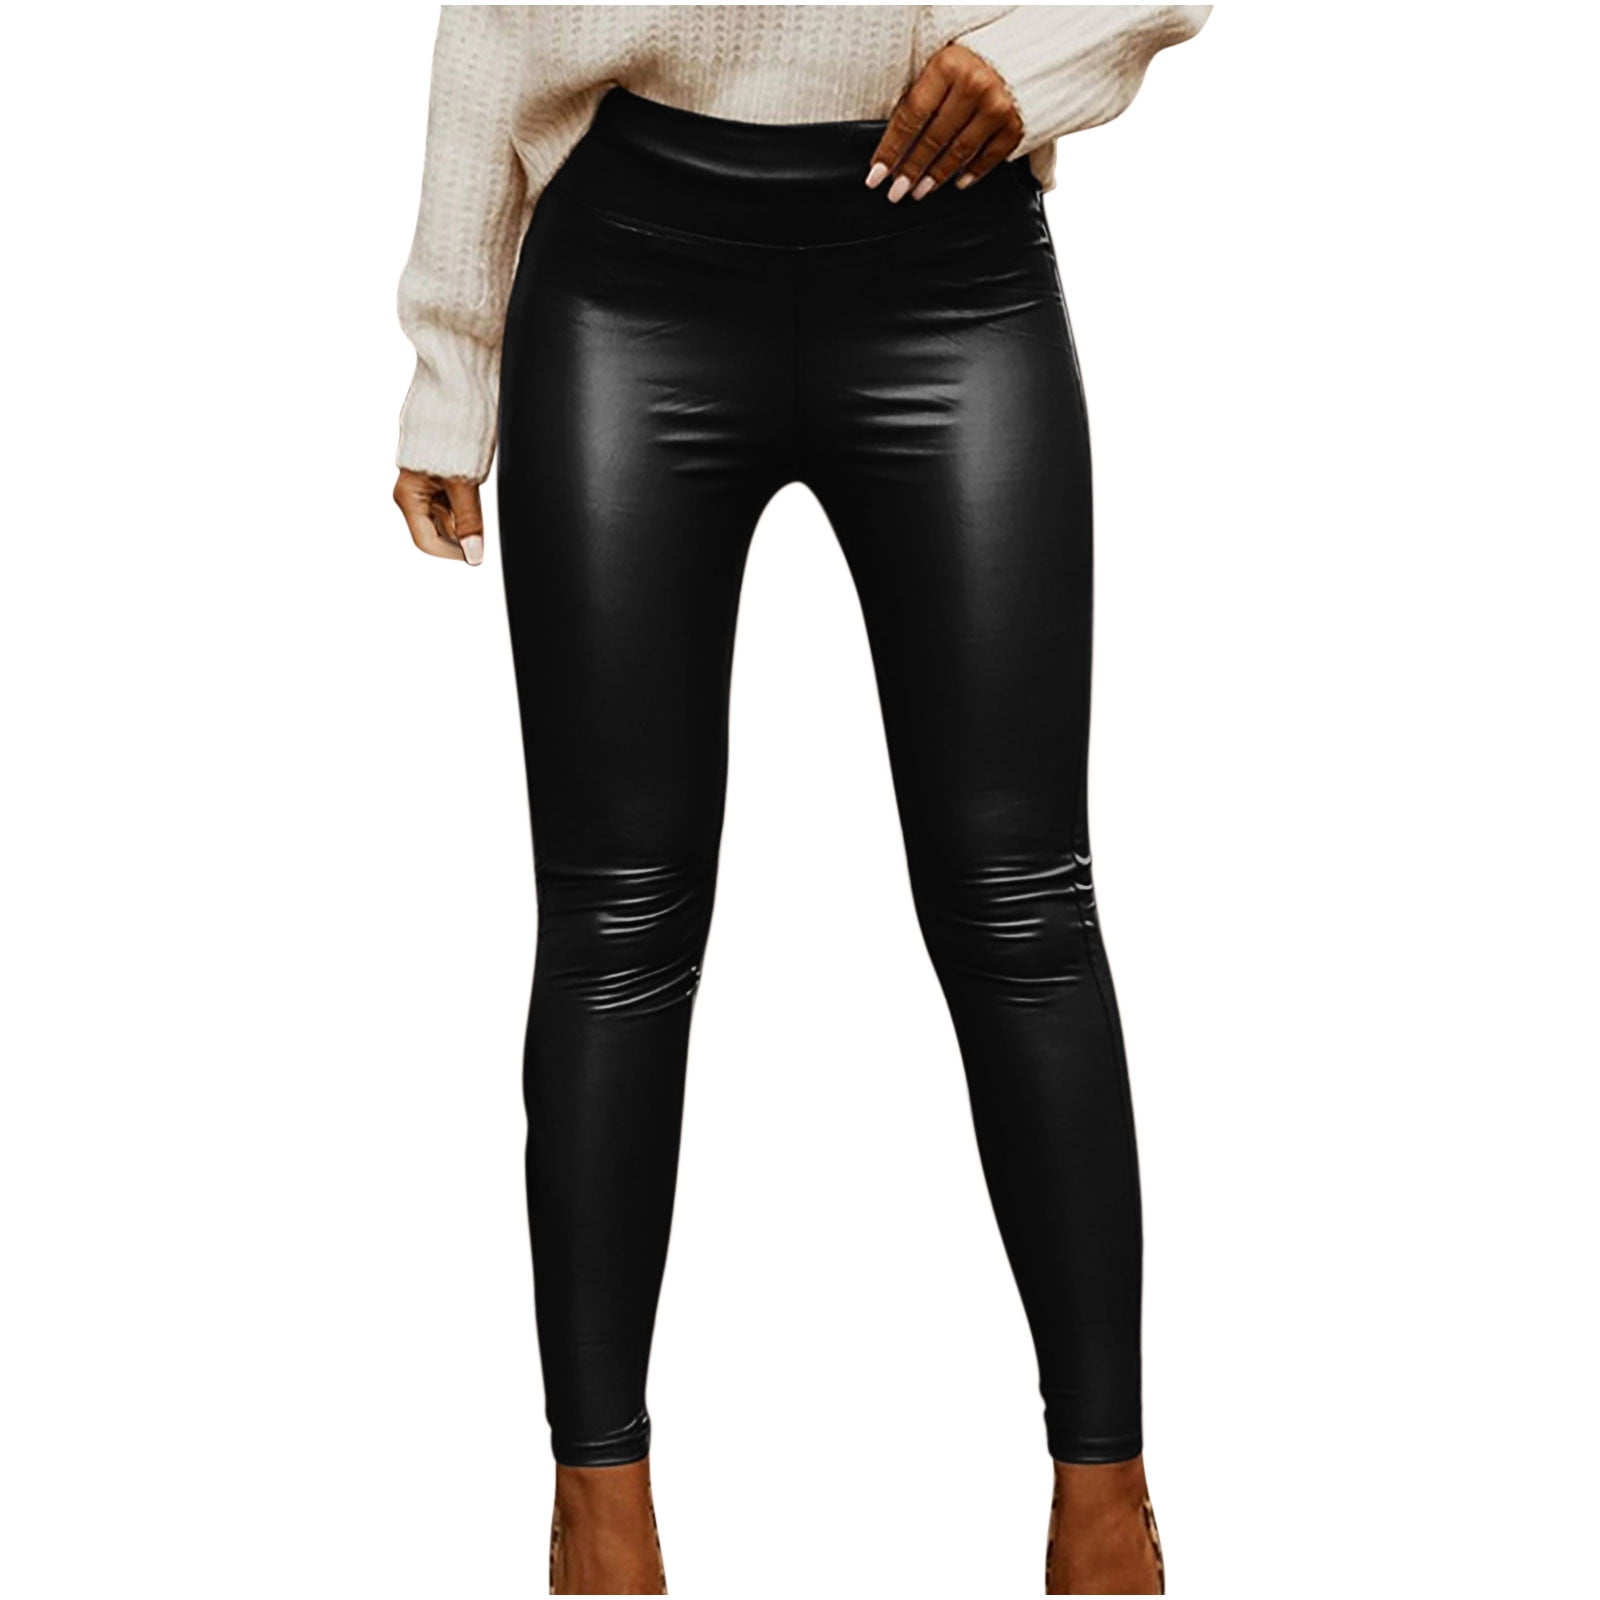 HAPIMO Savings Hip Wrapped Leather Pants for Women Solid Color